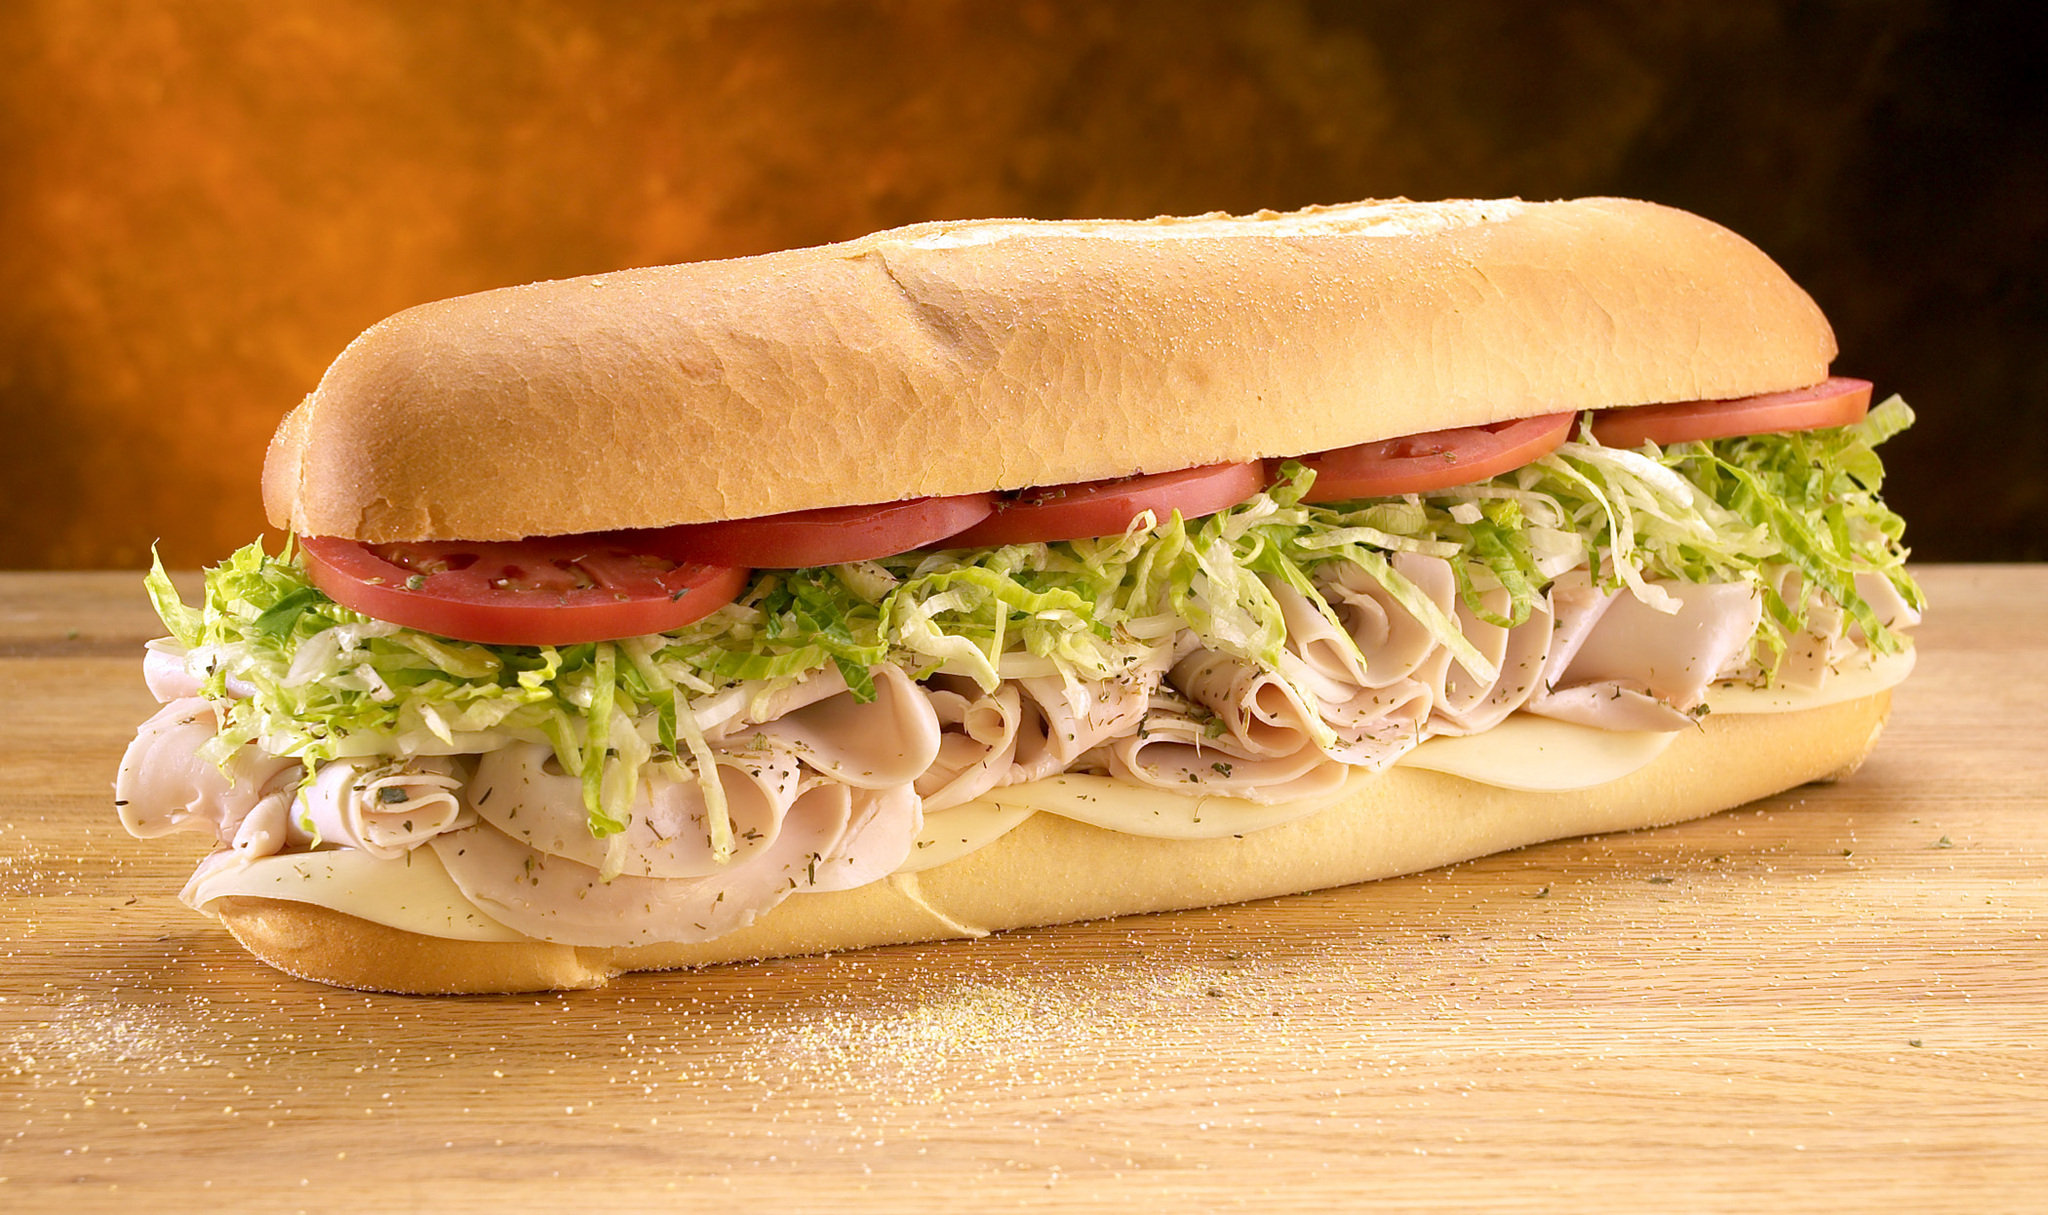 Jersey Mike’s deals: Save 25% on subs with app order